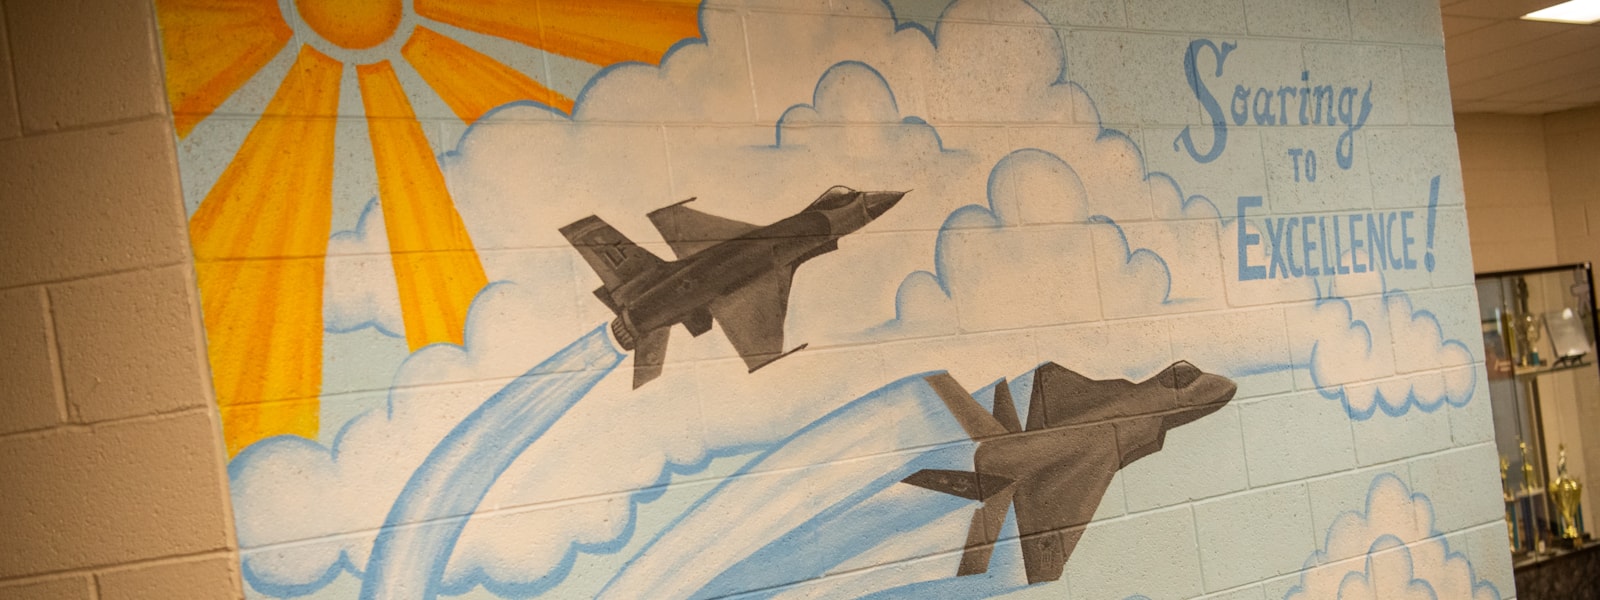 Soaring to Excellence mural